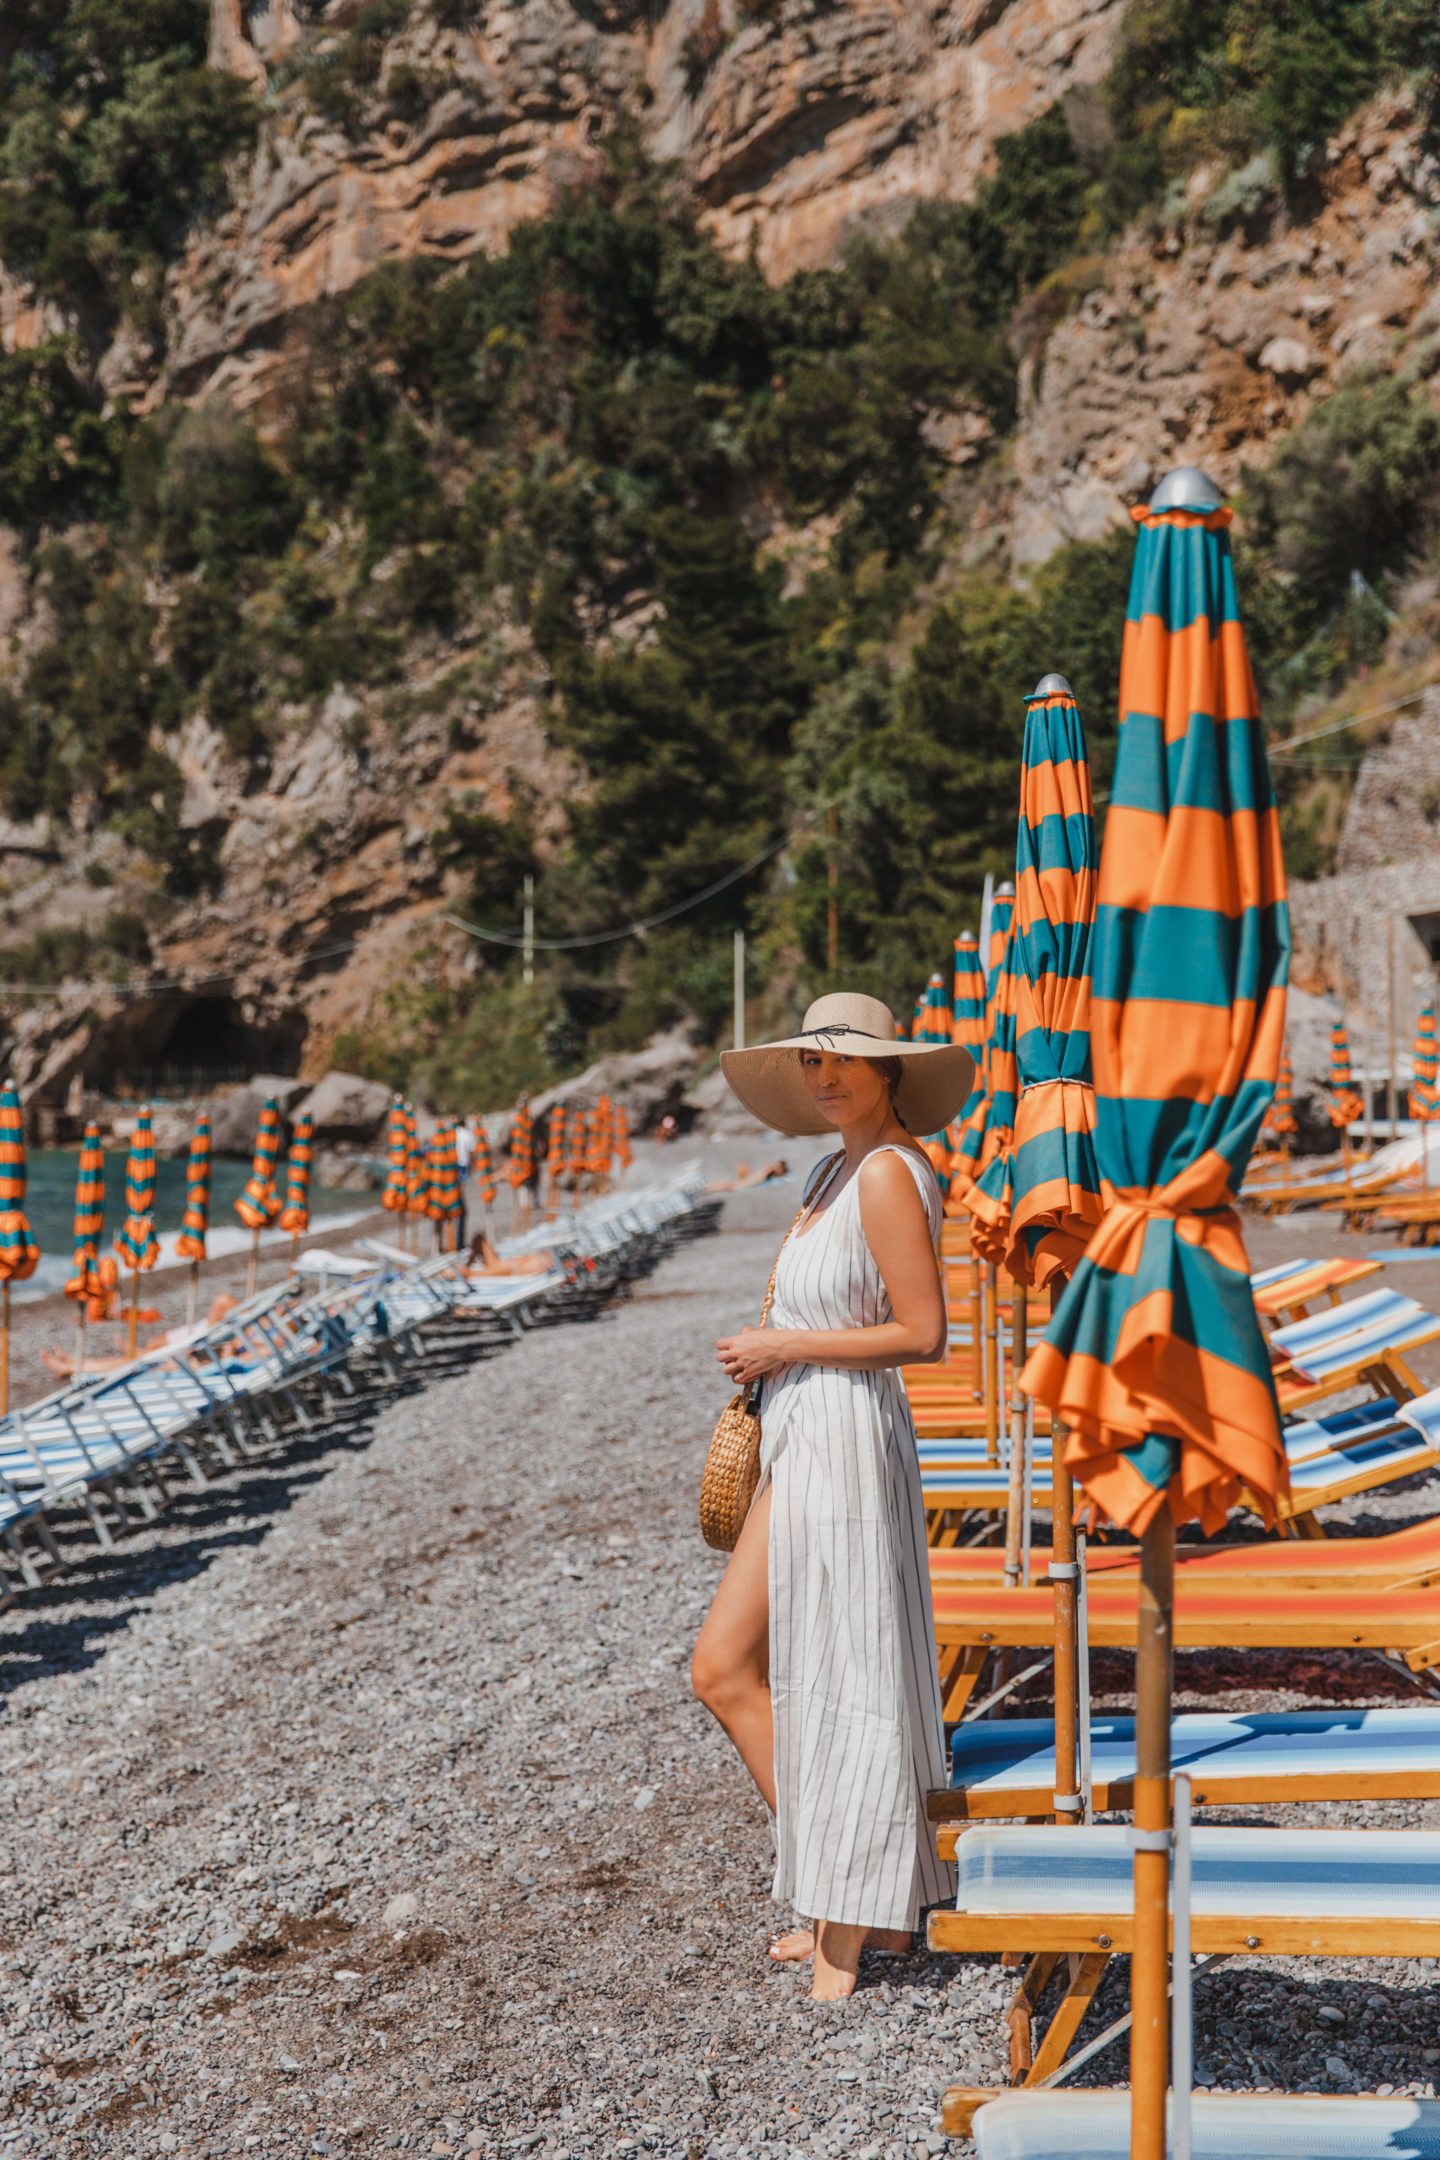 The Best Positano Instagram Shots | 12 Beautiful Shots You Can't Miss: Fornillo Beach